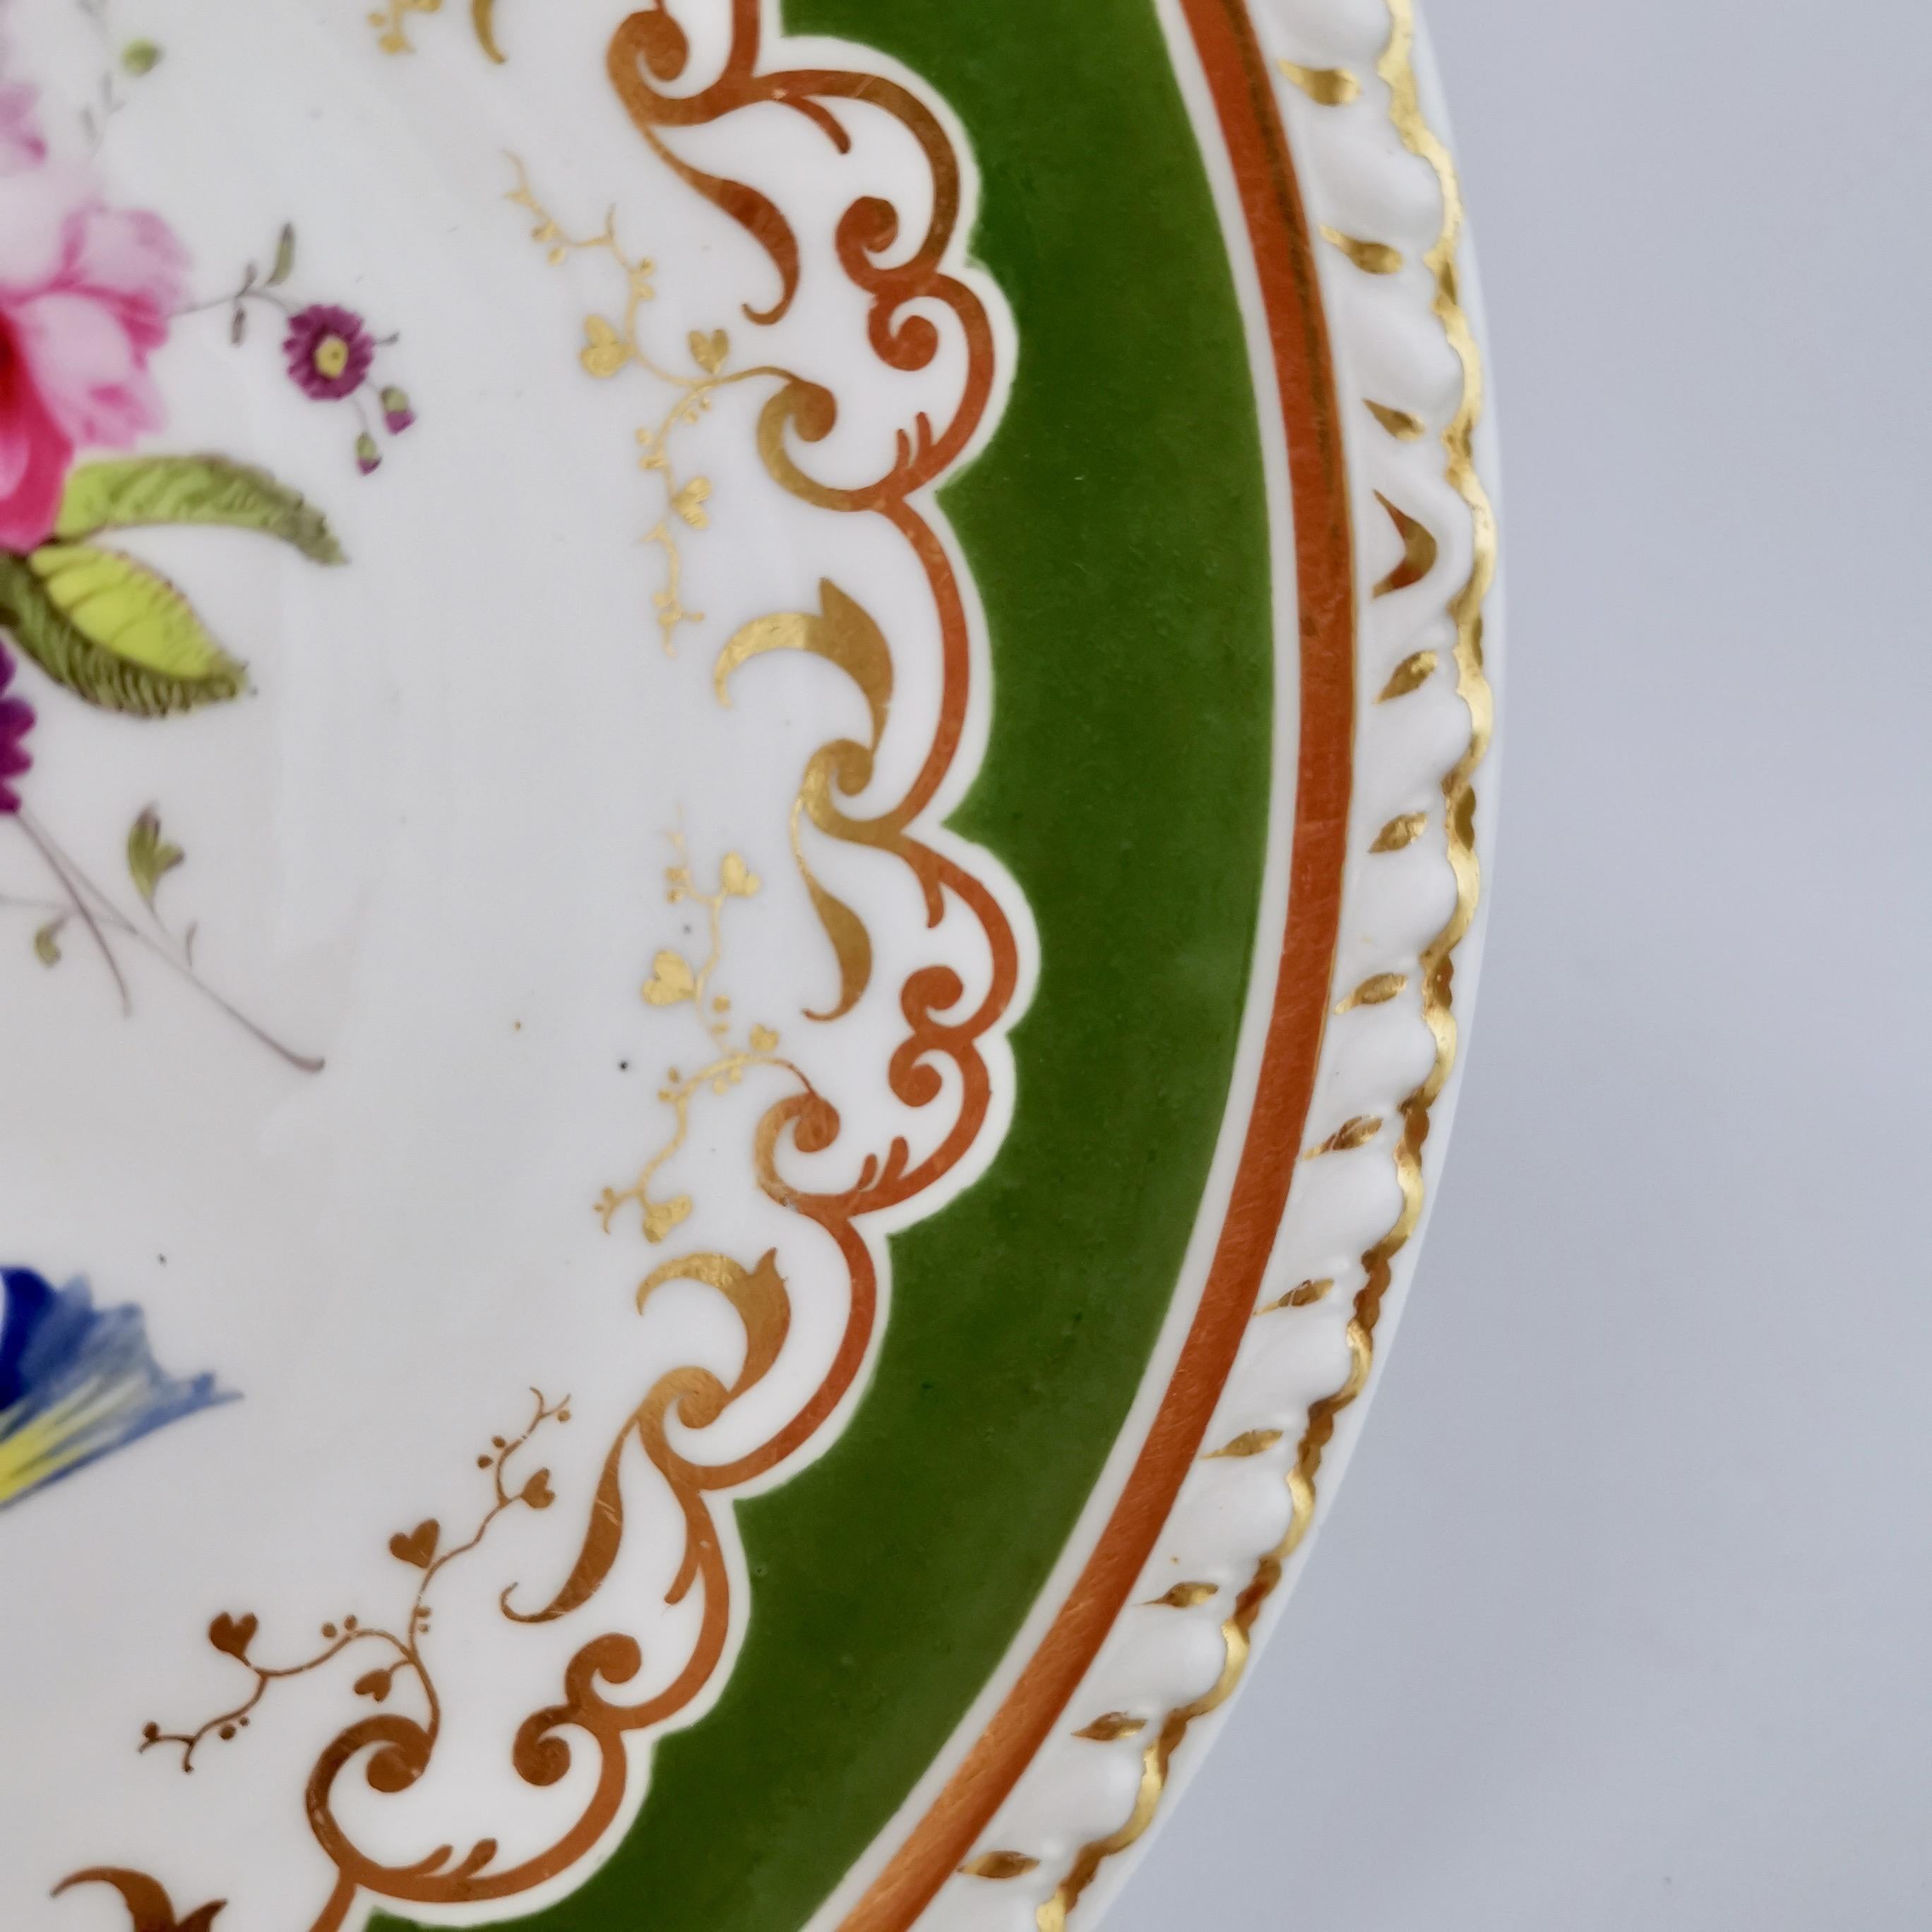 Hand-Painted Ridgway Porcelain Plate, Green with Hand Painted Flowers, Regency ca 1825 For Sale